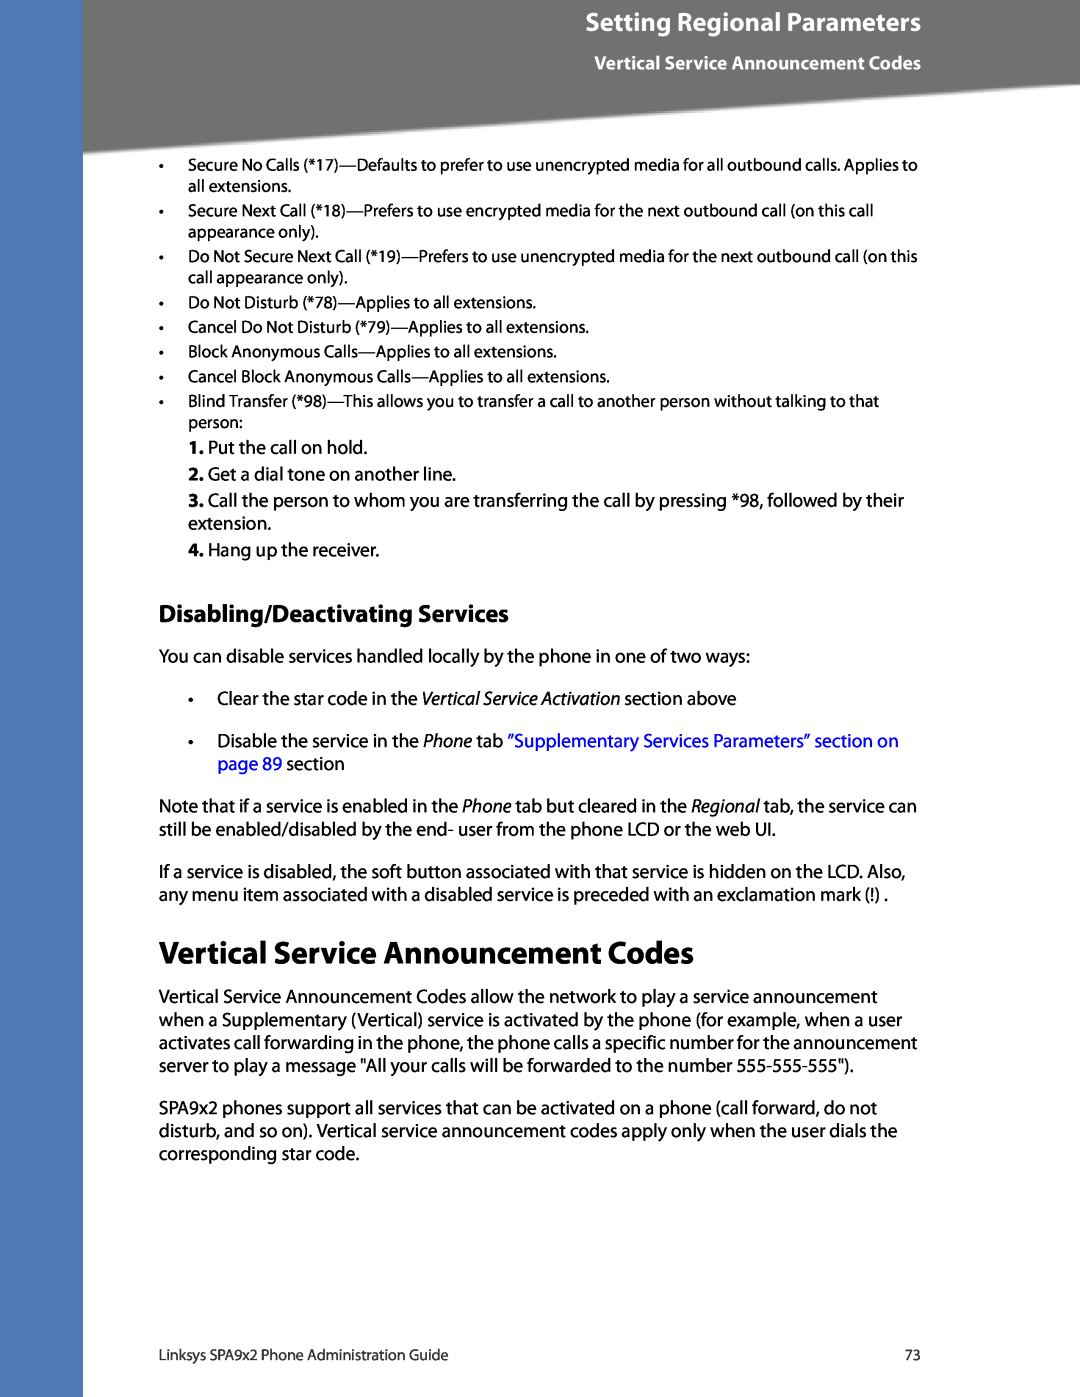 Linksys SPA962, SPA942 Vertical Service Announcement Codes, Disabling/Deactivating Services, Setting Regional Parameters 